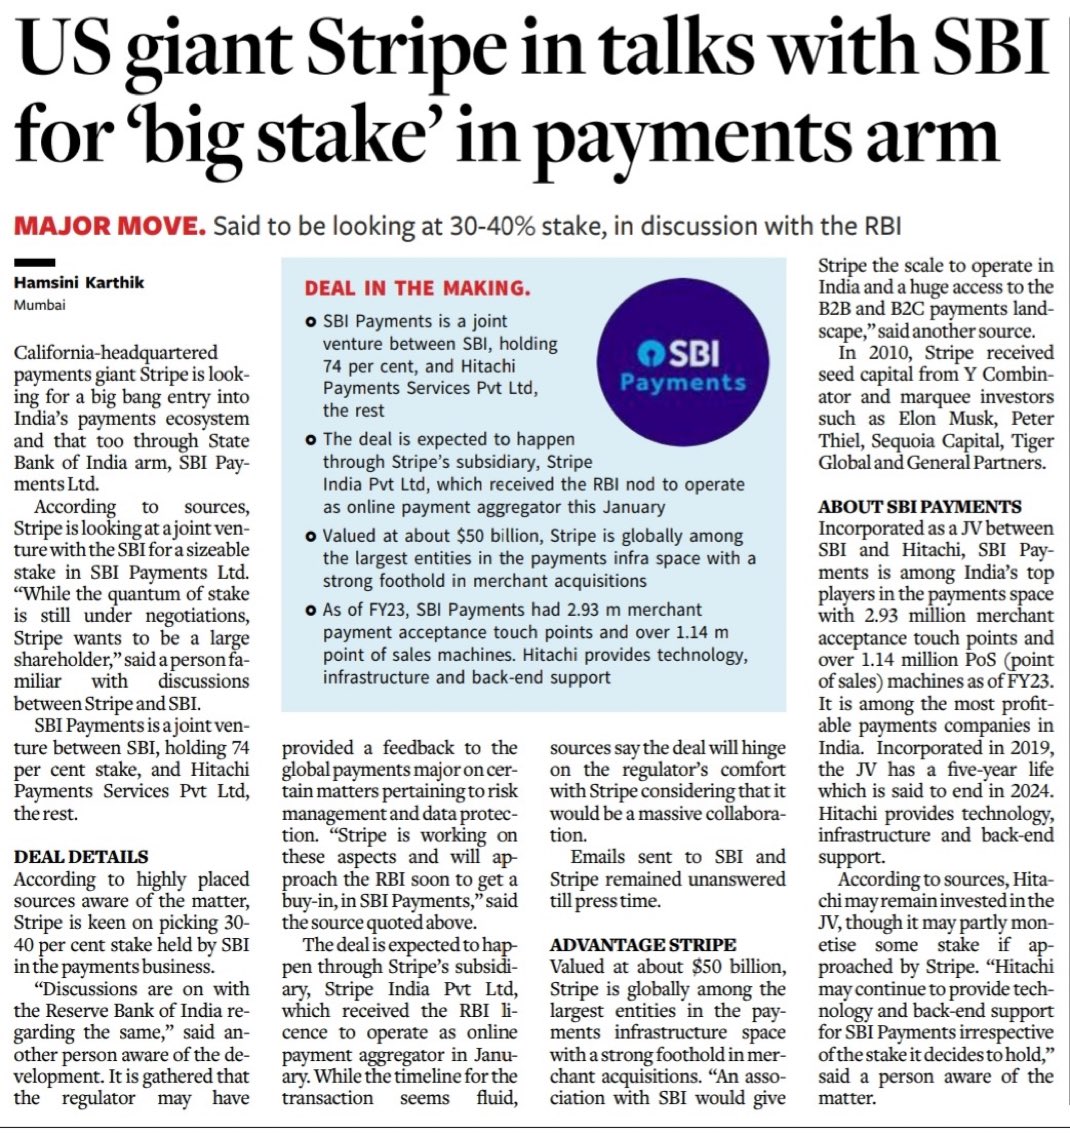 First Google, then Walmart & Meta, now this, another big piece of 🇮🇳 payments ecosystem carved out, not sure how #atmanirbhar 🇮🇳is gonna be.

It is utterly vital for native organic champs in financial services. Trust @FinMinIndia,  @RBI hv cards up their sleeve?

Cc: @DivaJain2